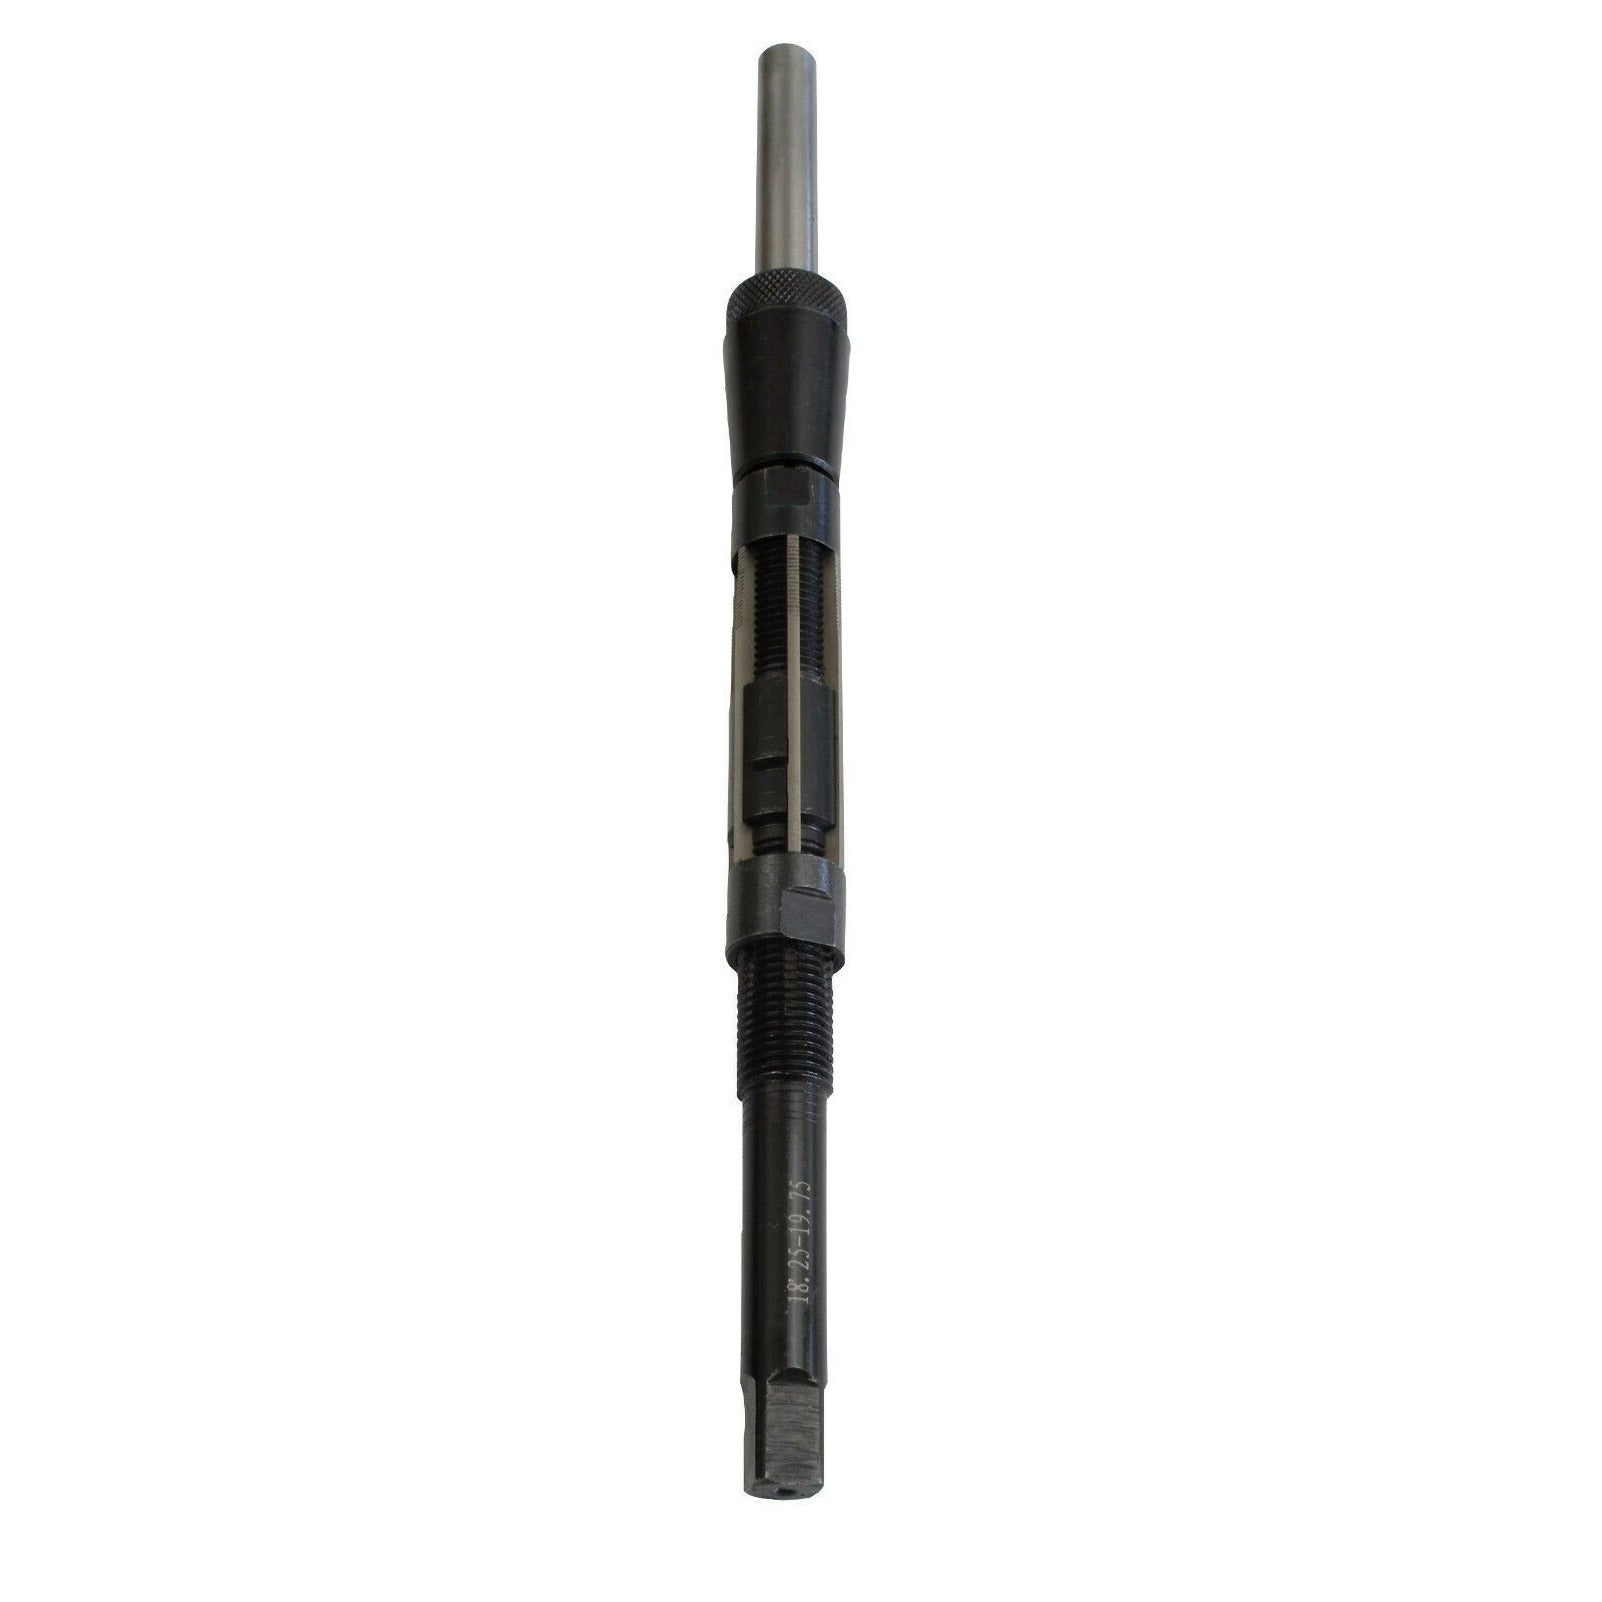 18.25 - 19.75mm Adjustable Hand Reamer with Guide